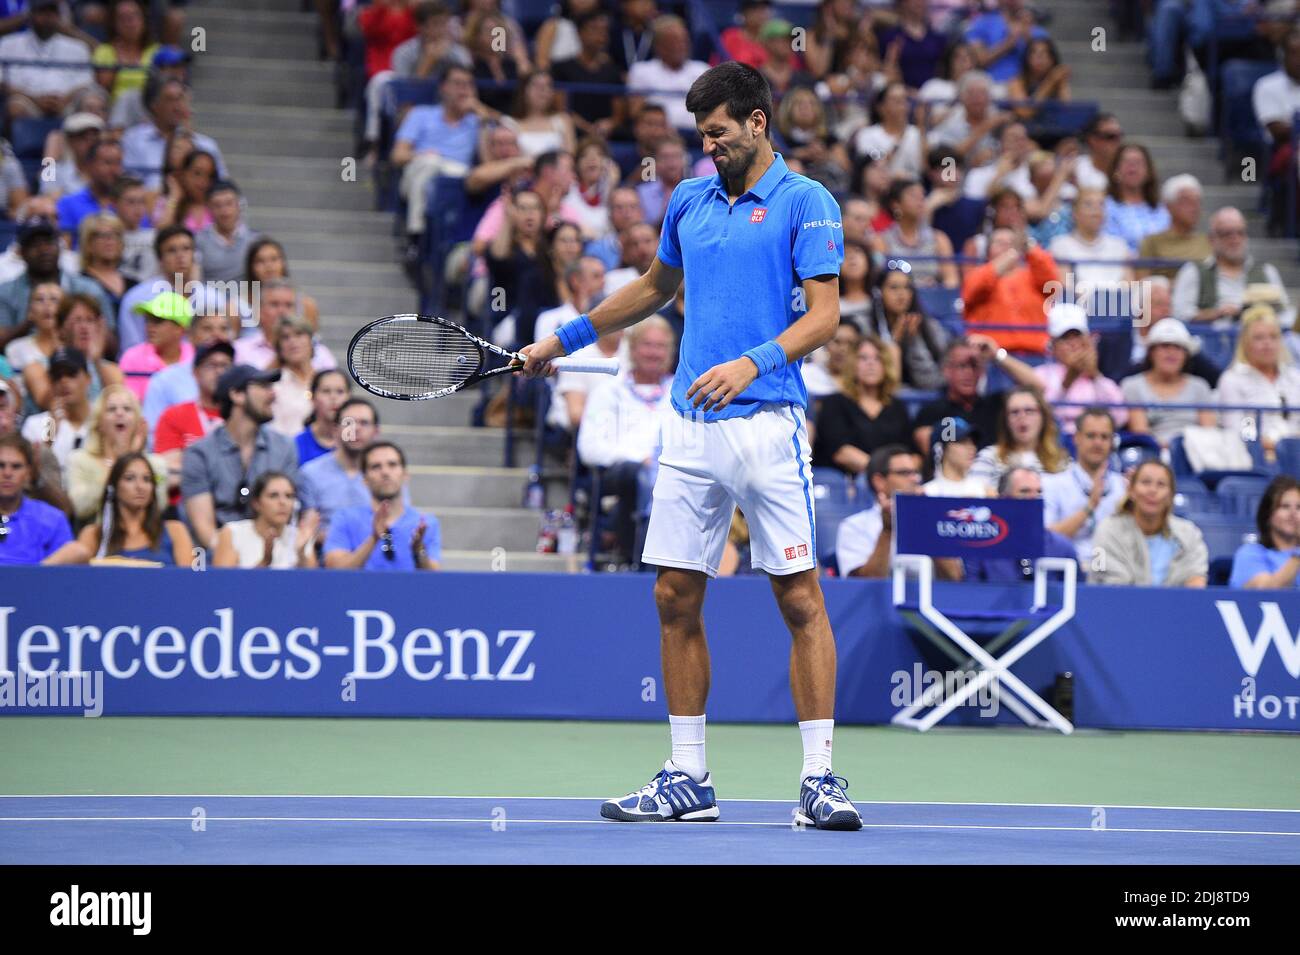 Novak Djokovic of Serbia plays his 2016 US Open Men's Singles final match  at the USTA Billie Jean King National Tennis Center in New York City, NY,  USA, on September 11, 2016.